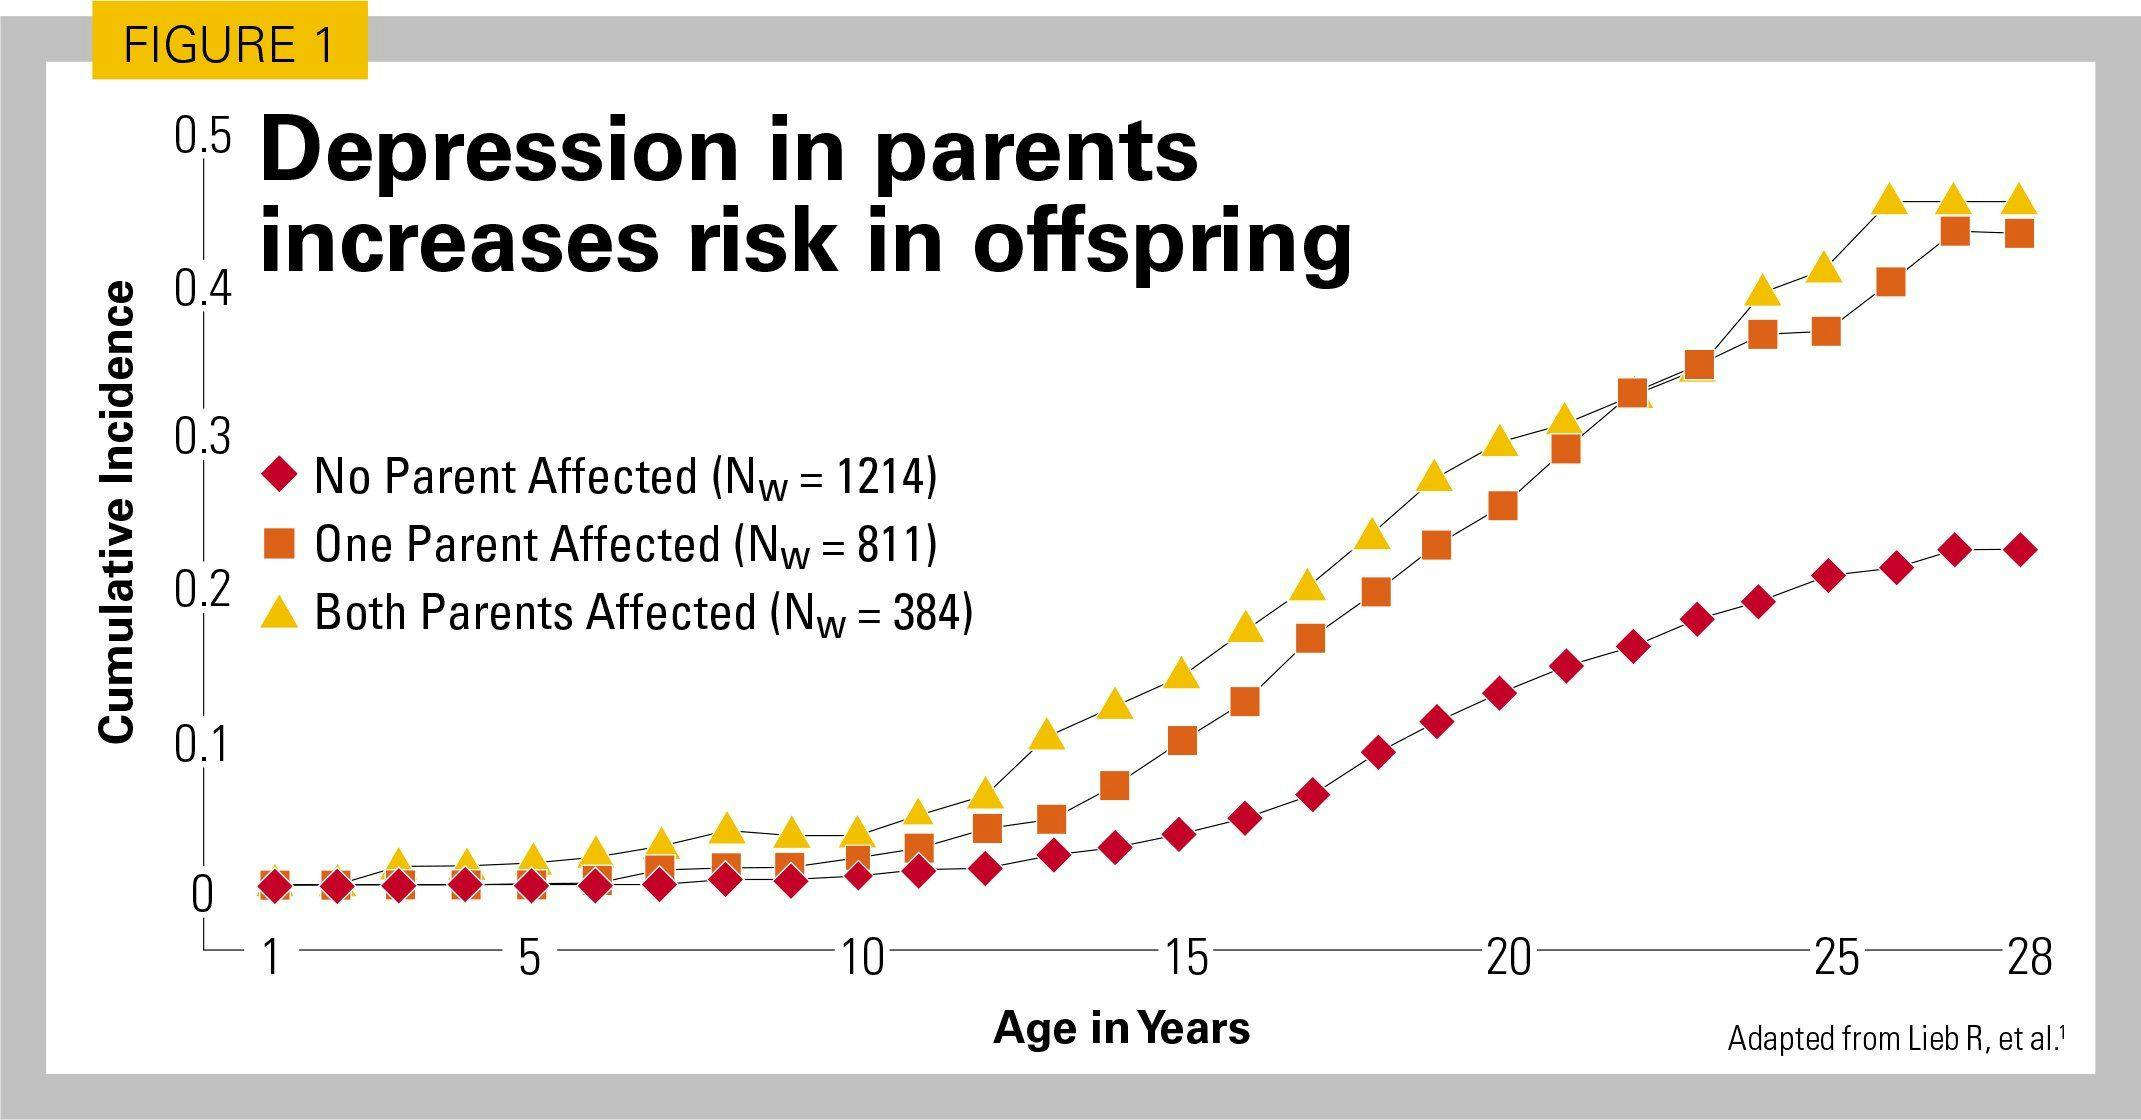 Depression in parents increases risk in offspring